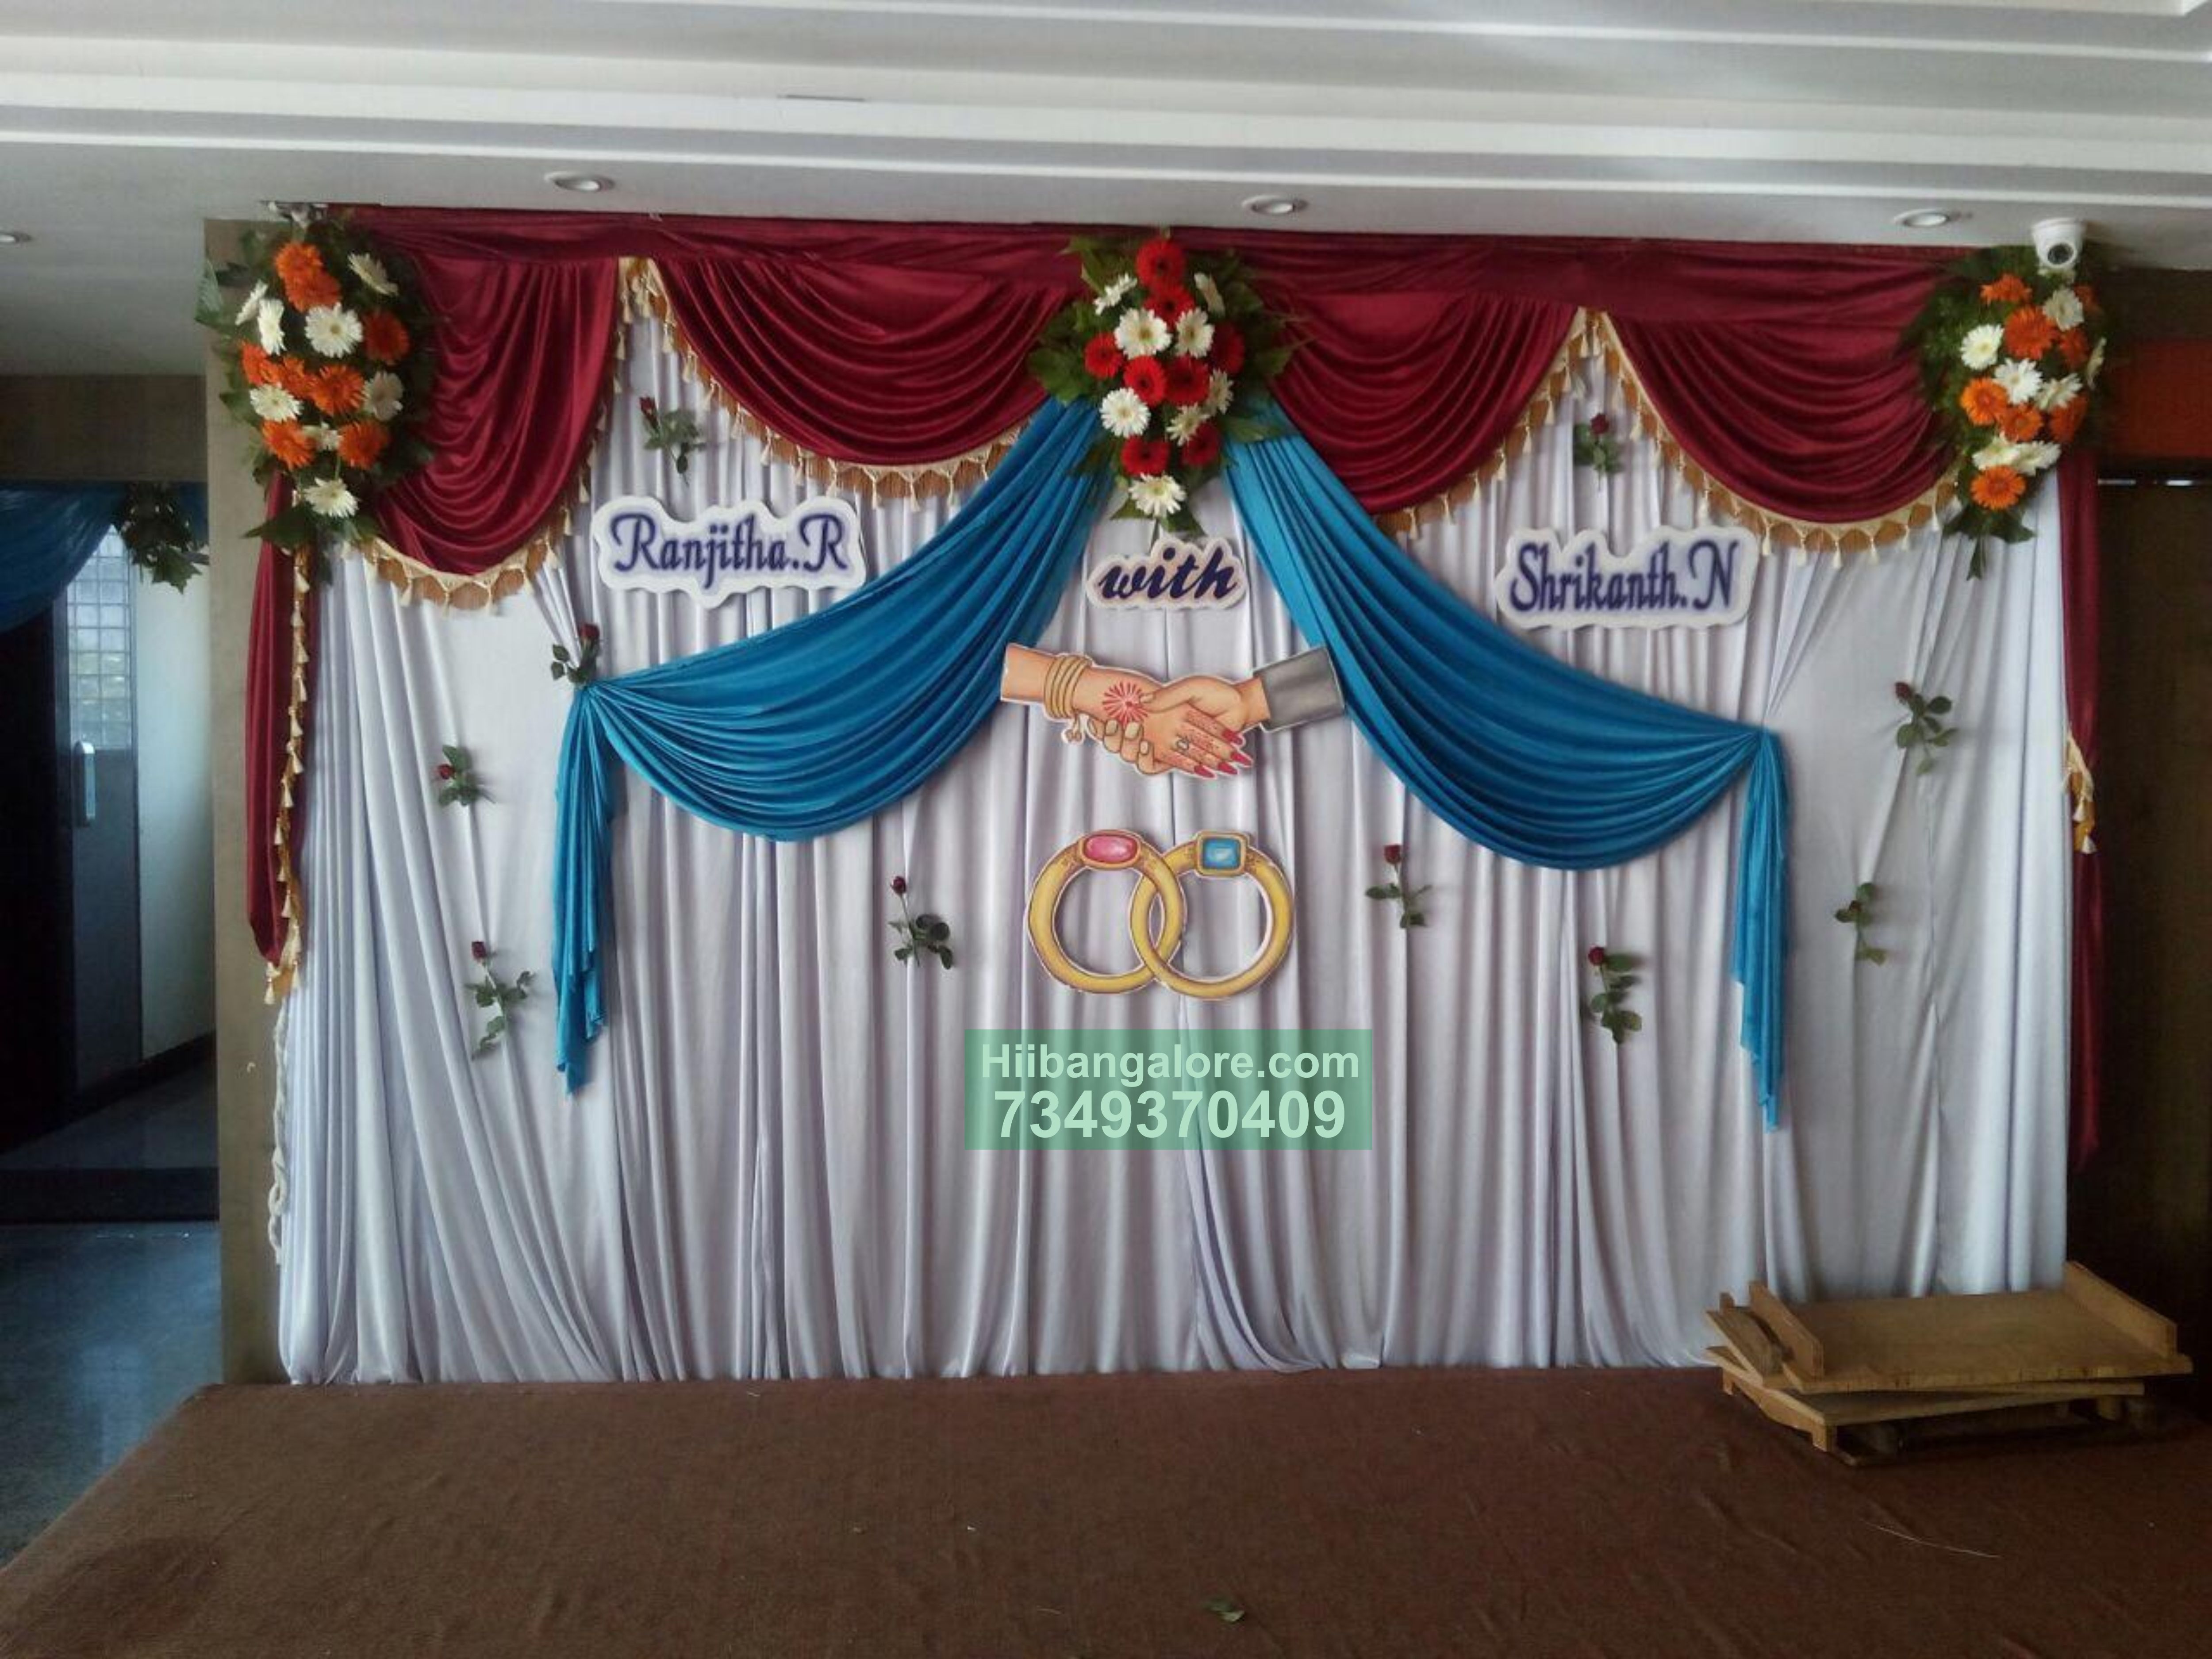 Ring Ceremony Decoration Service at best price in Gurgaon | ID: 21560406962